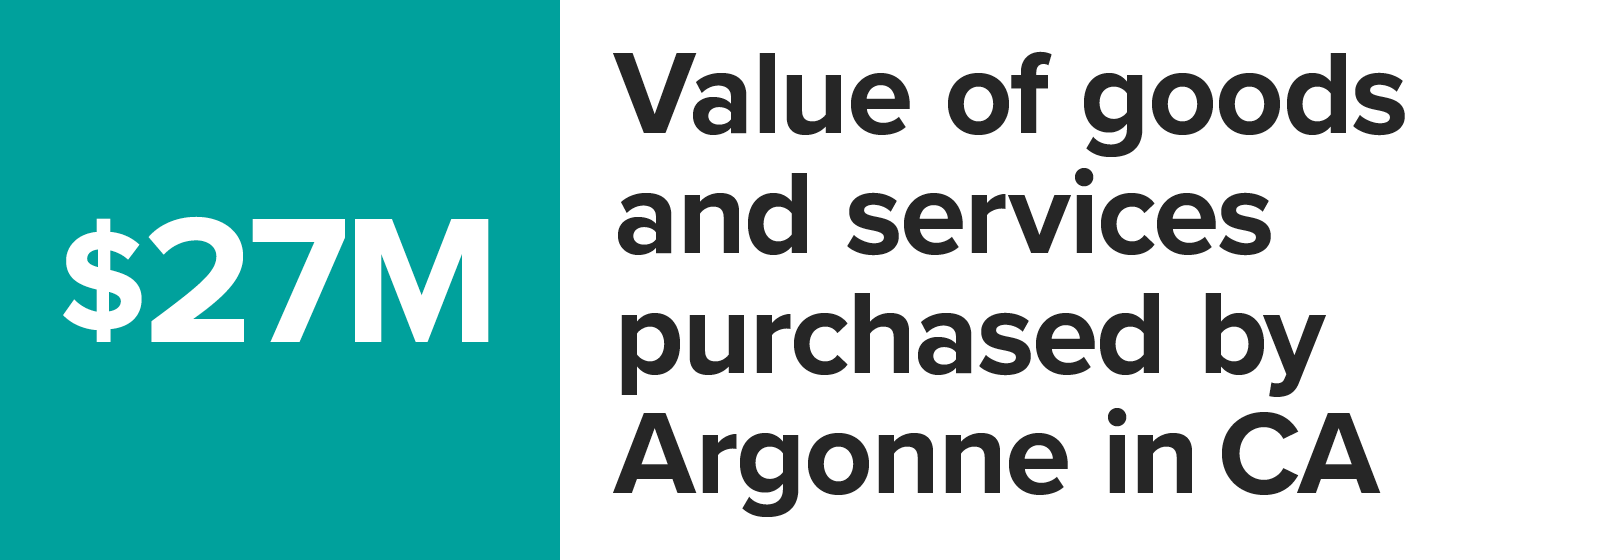 Number graphic value of goods and services purchased by Argonne in California